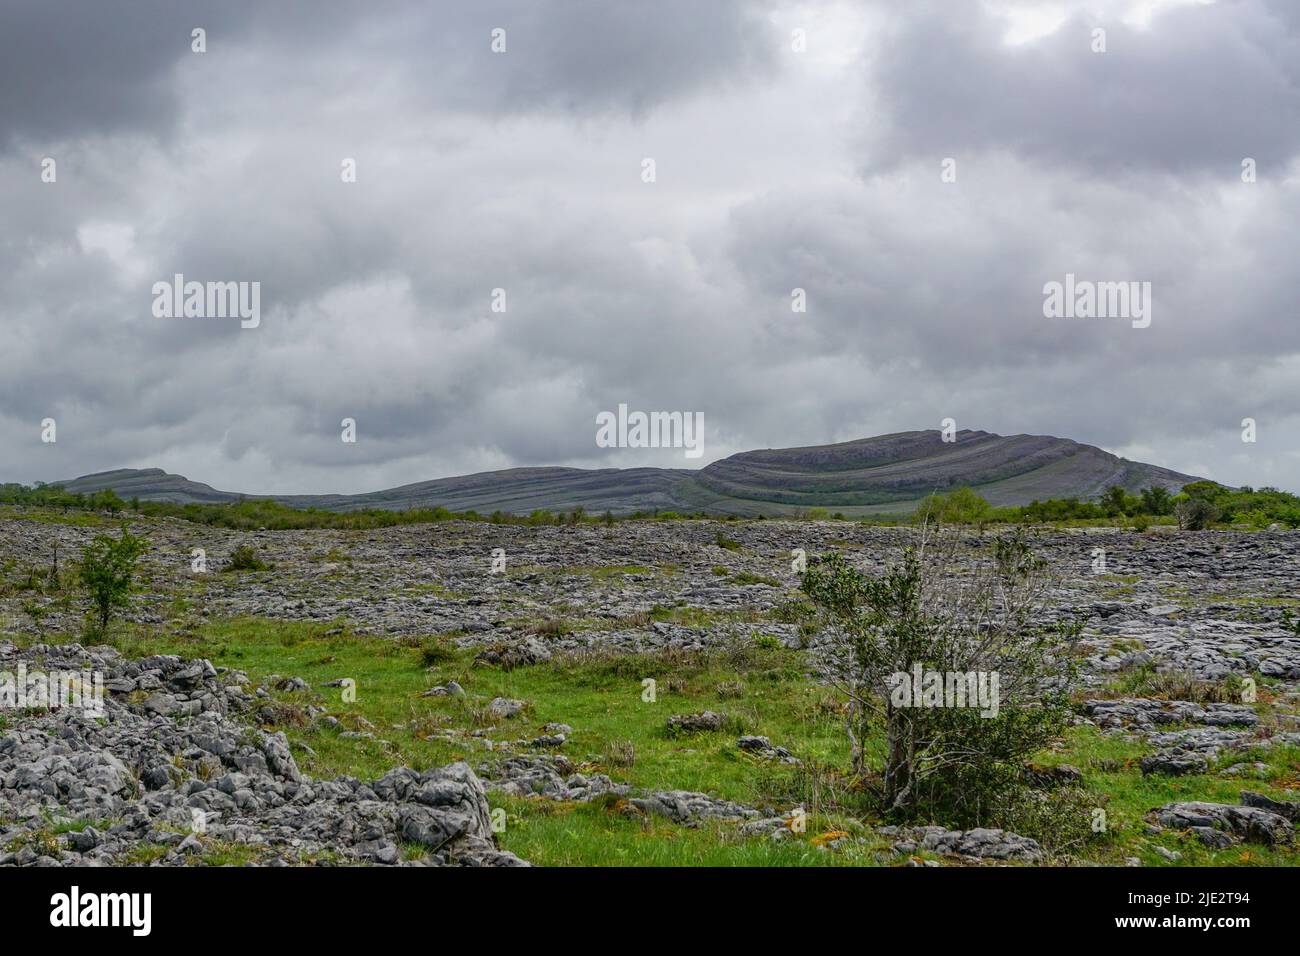 Burren National Park, Co. Clare, Ireland: View of Mullaghmore Hill from the Burren (“rocky place”). Stock Photo